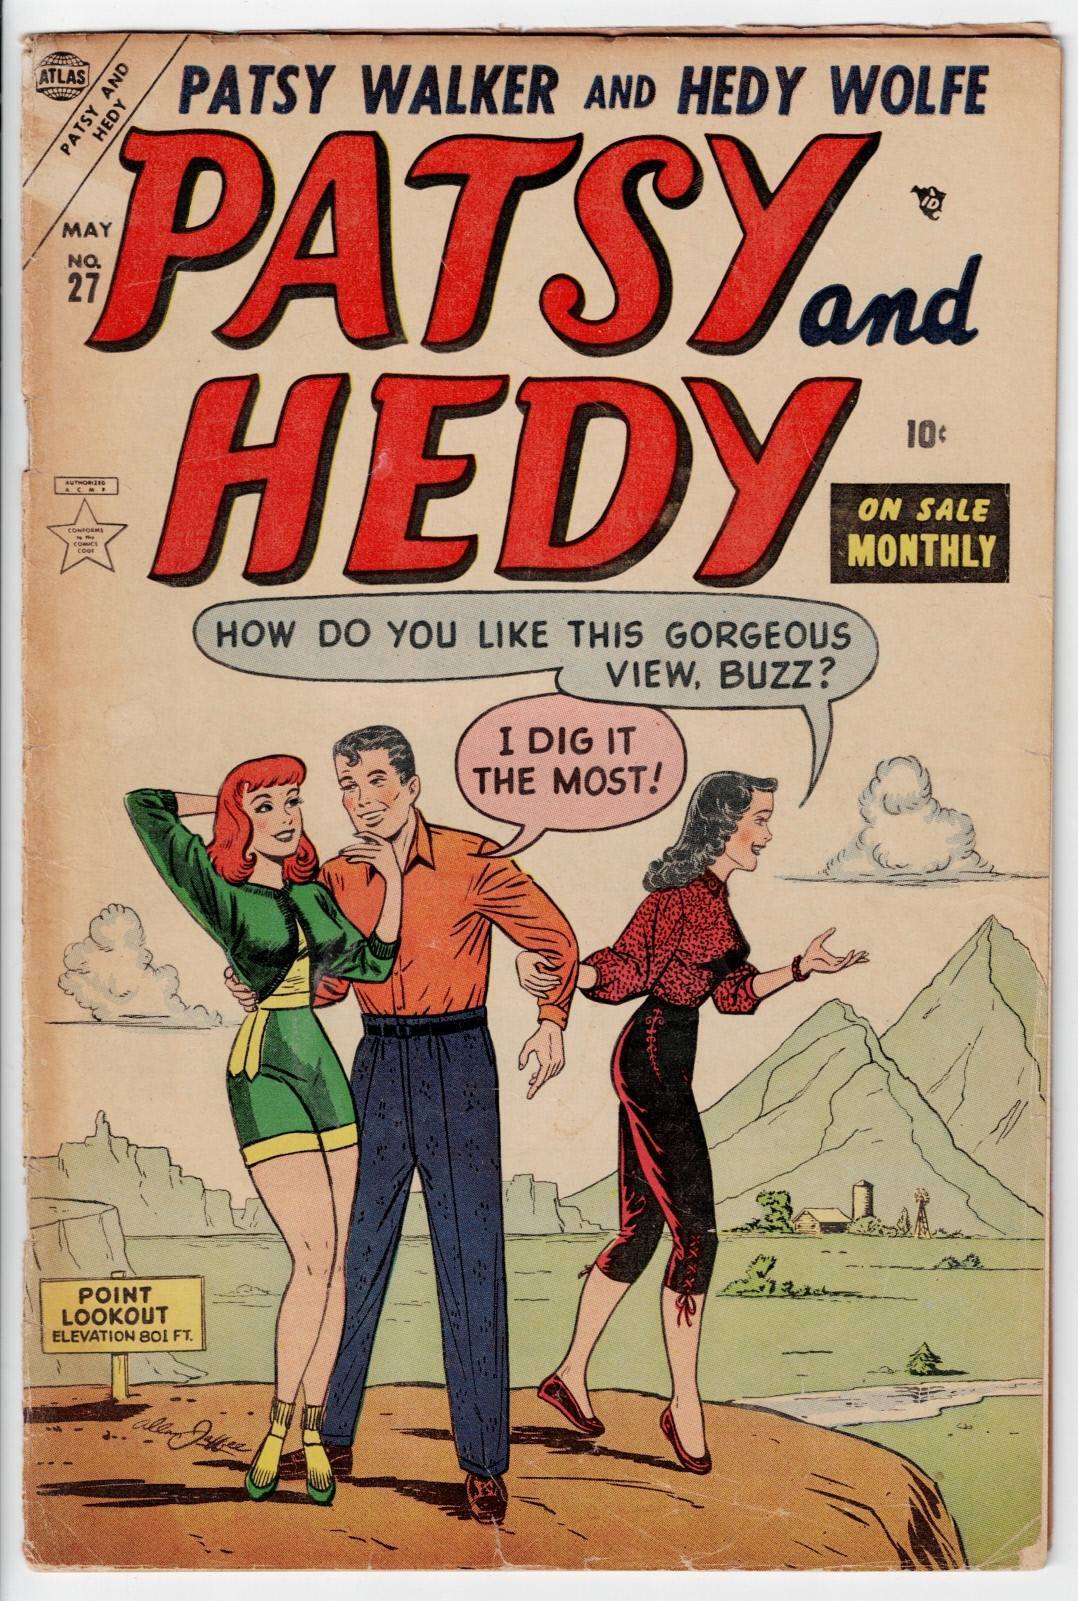 Patsy and Hedy #27 front